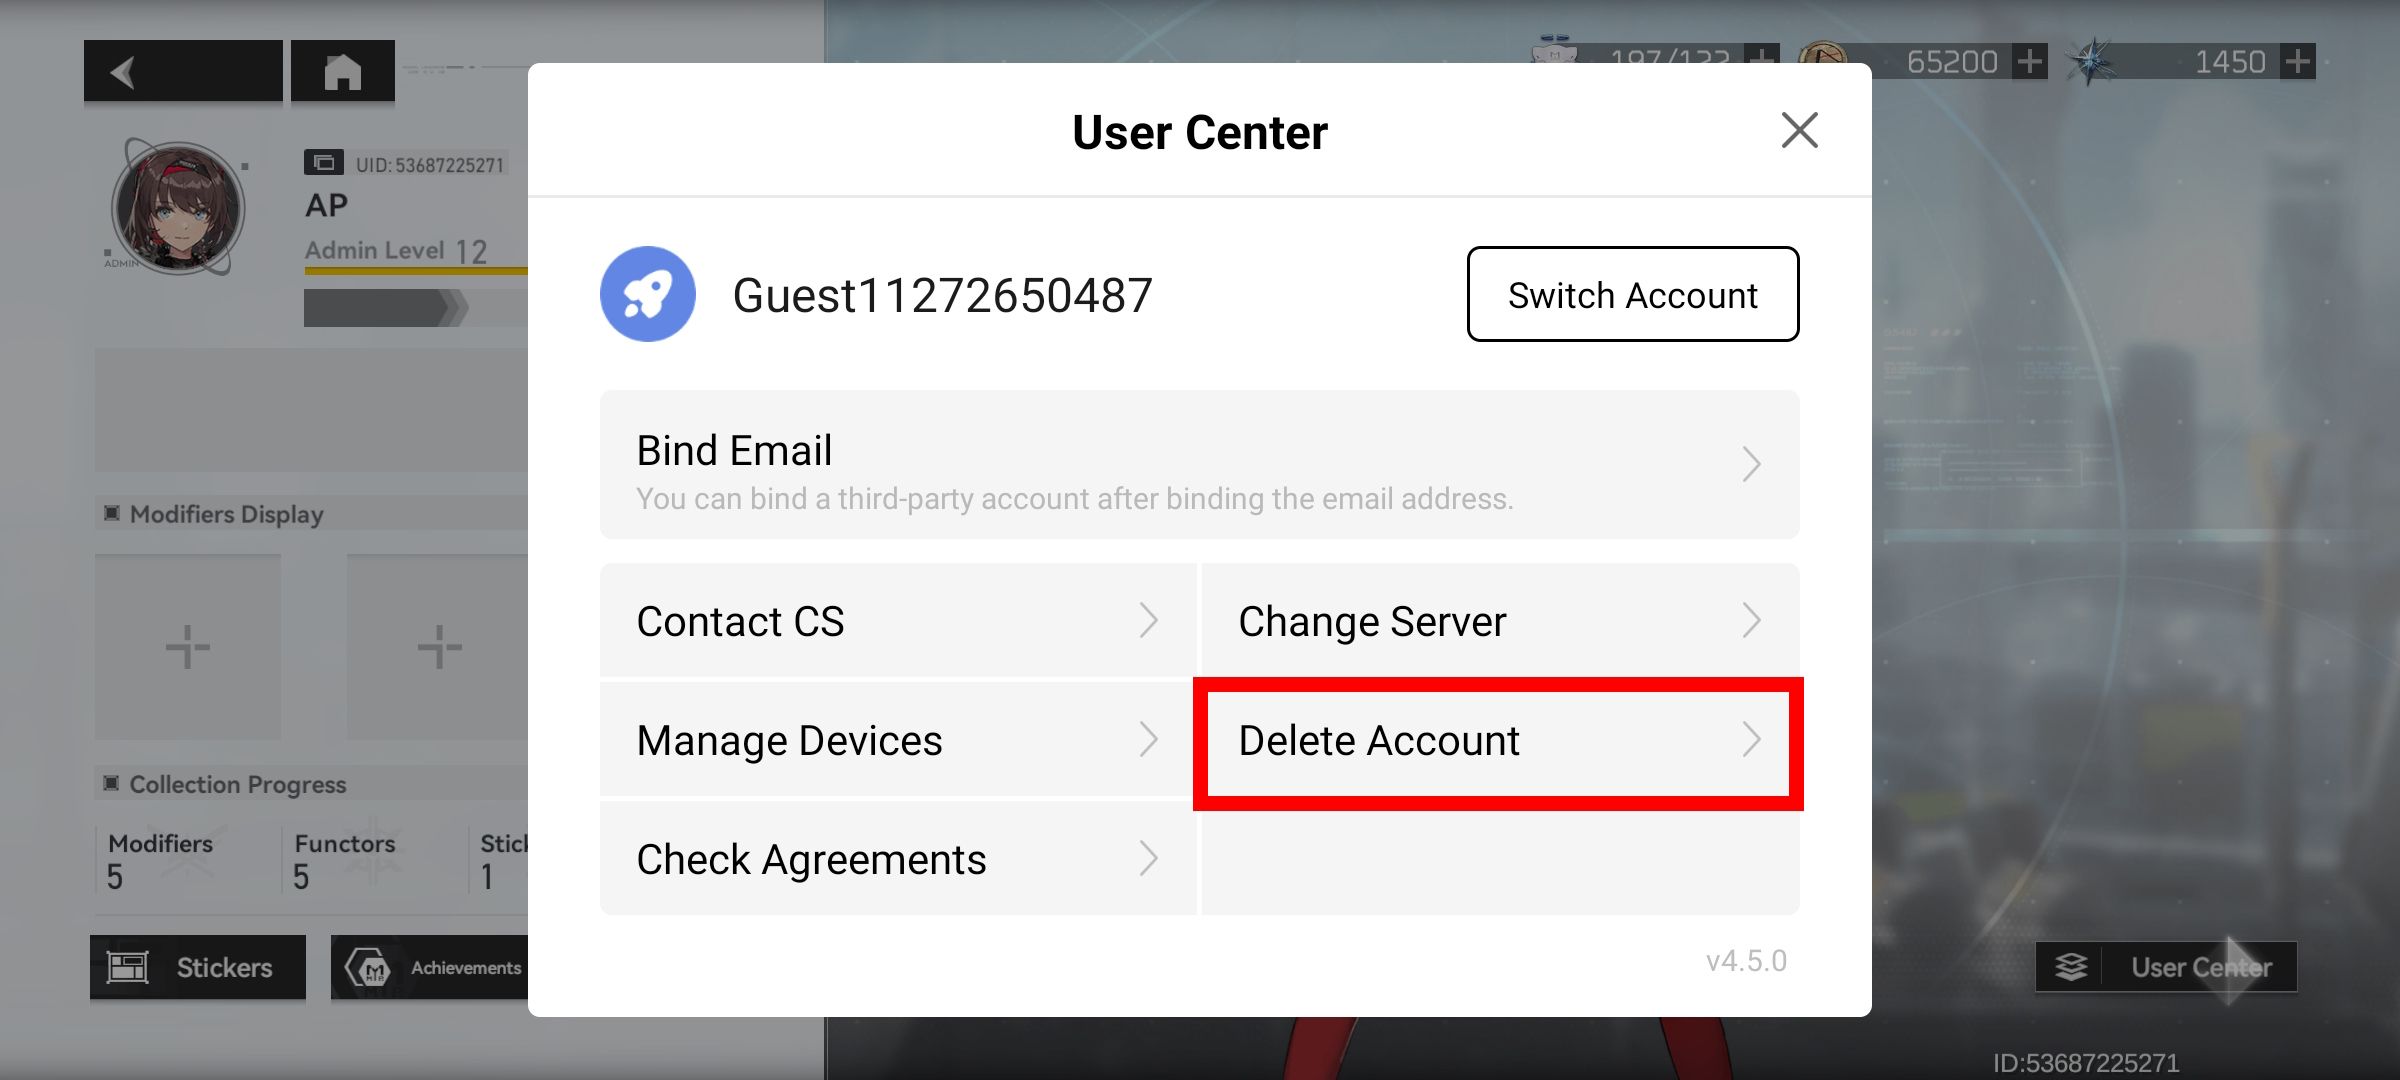 red rectangle outline over delete account button in user center